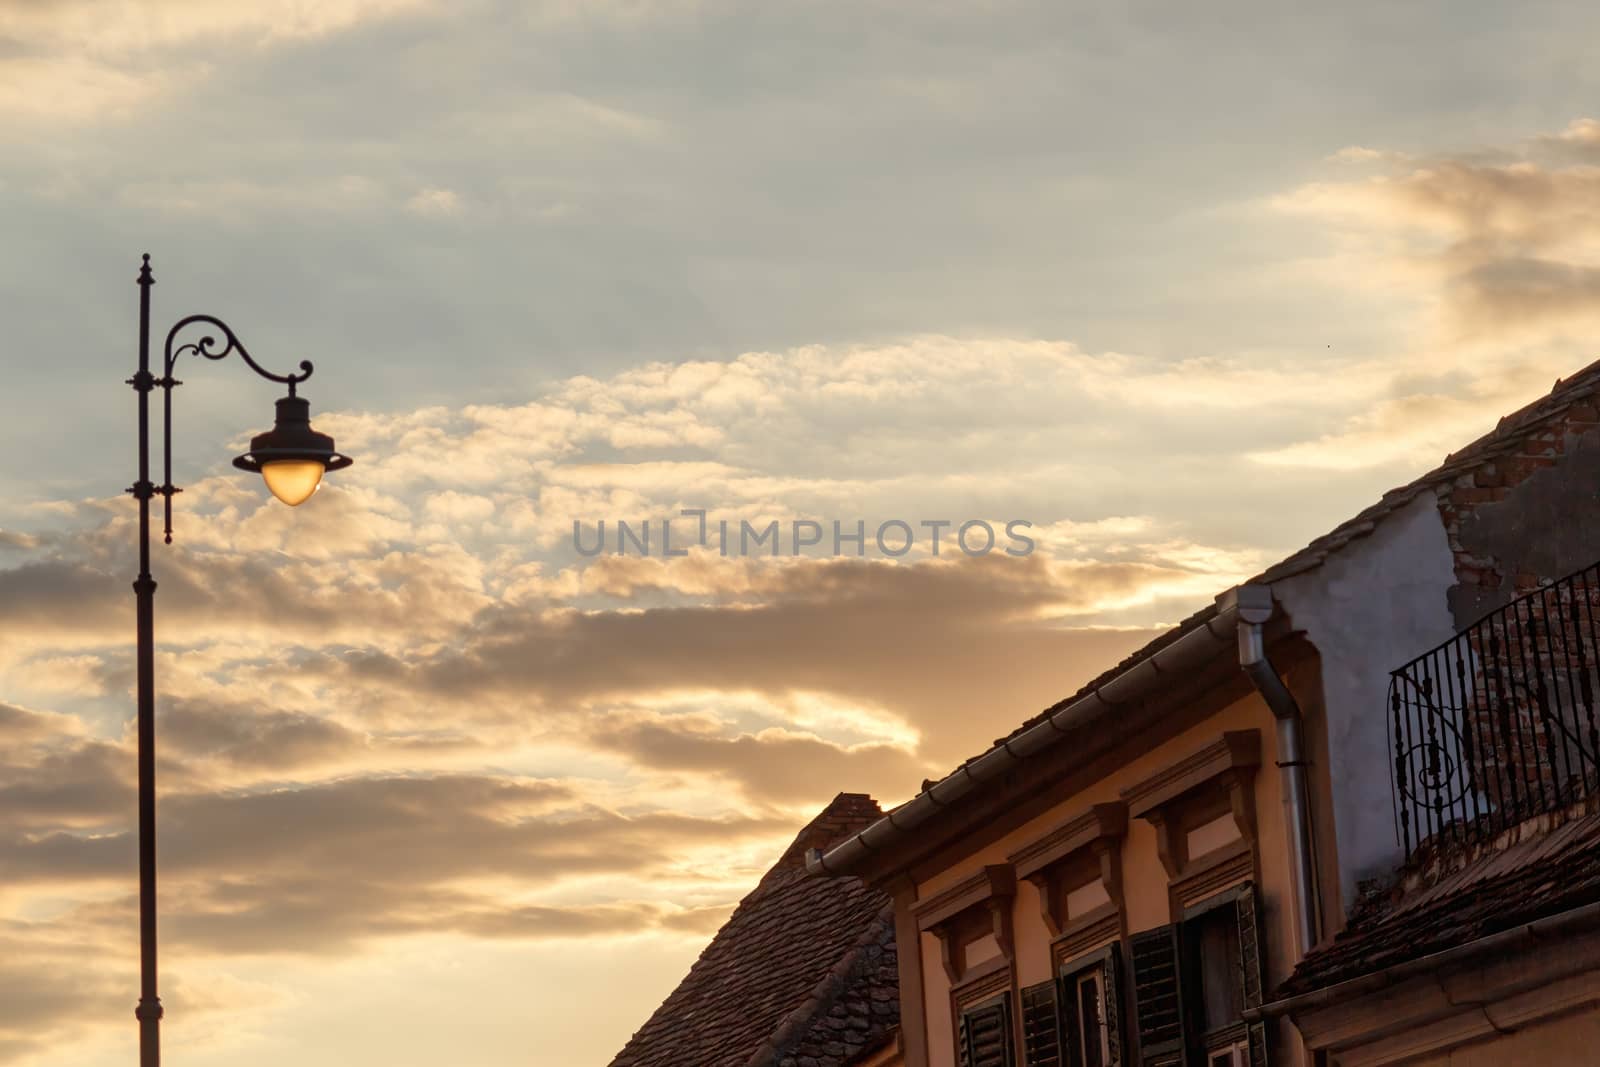 Concept of calm and serenity. Street lamp with colorful and cloudy sunset in the background. Sibiu, Romania, old medieval town in eastern central Europe. by dugulan